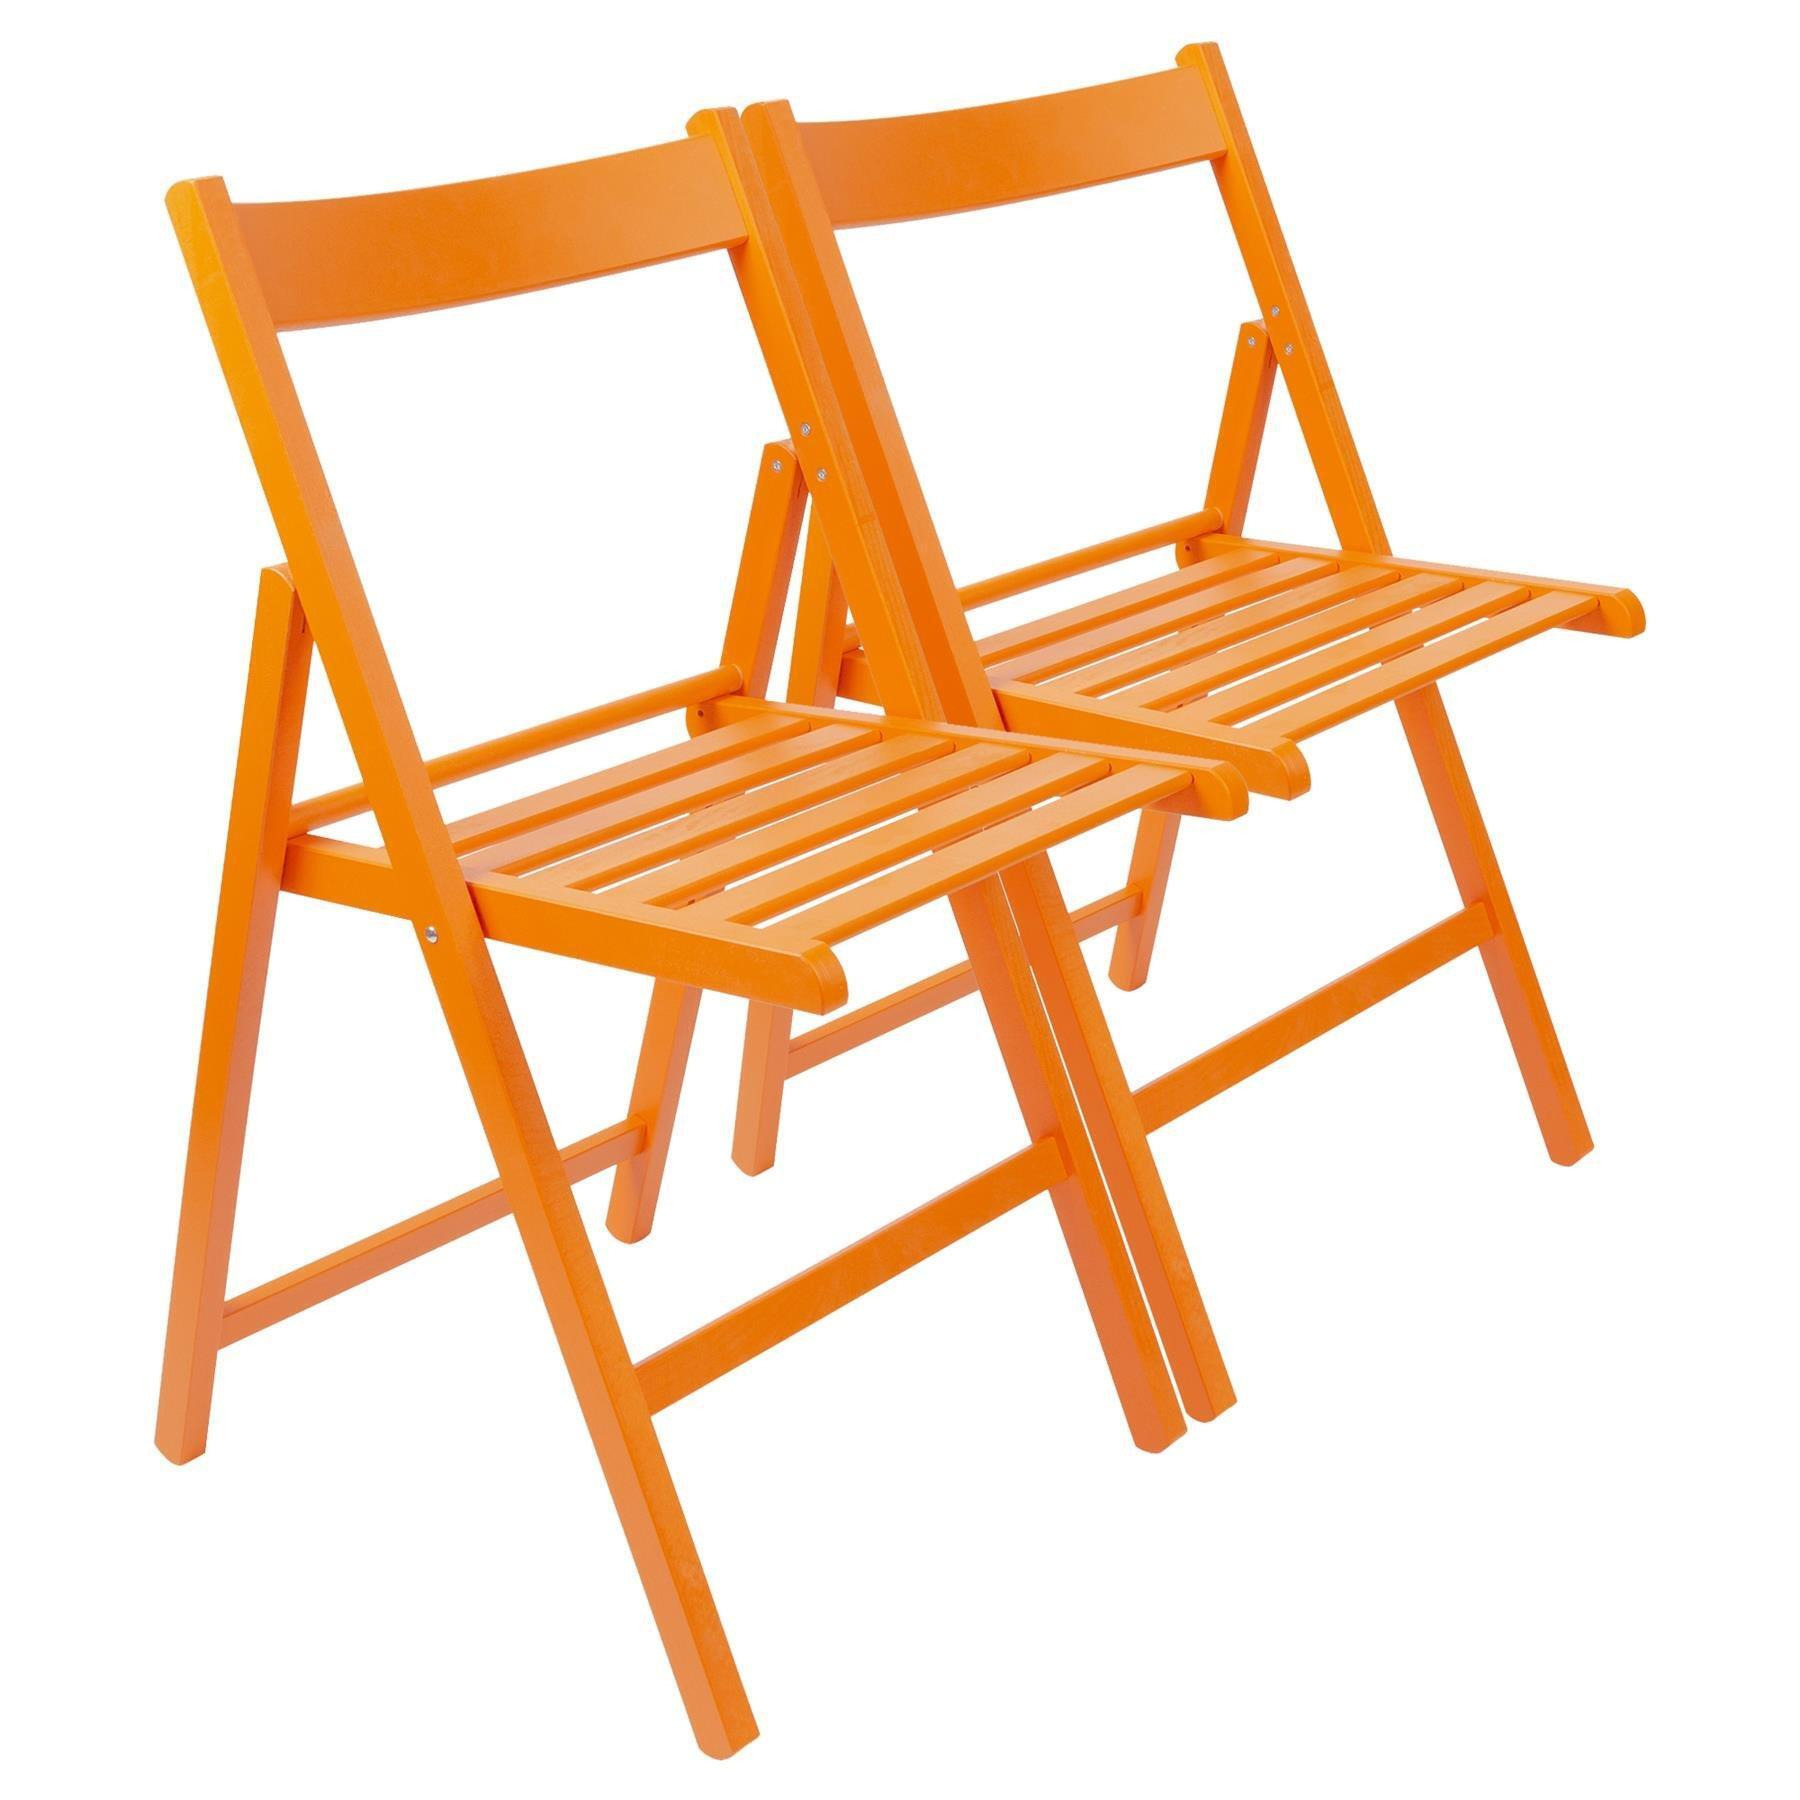 Beech Wood Folding Chairs Pack of 2 - image 1